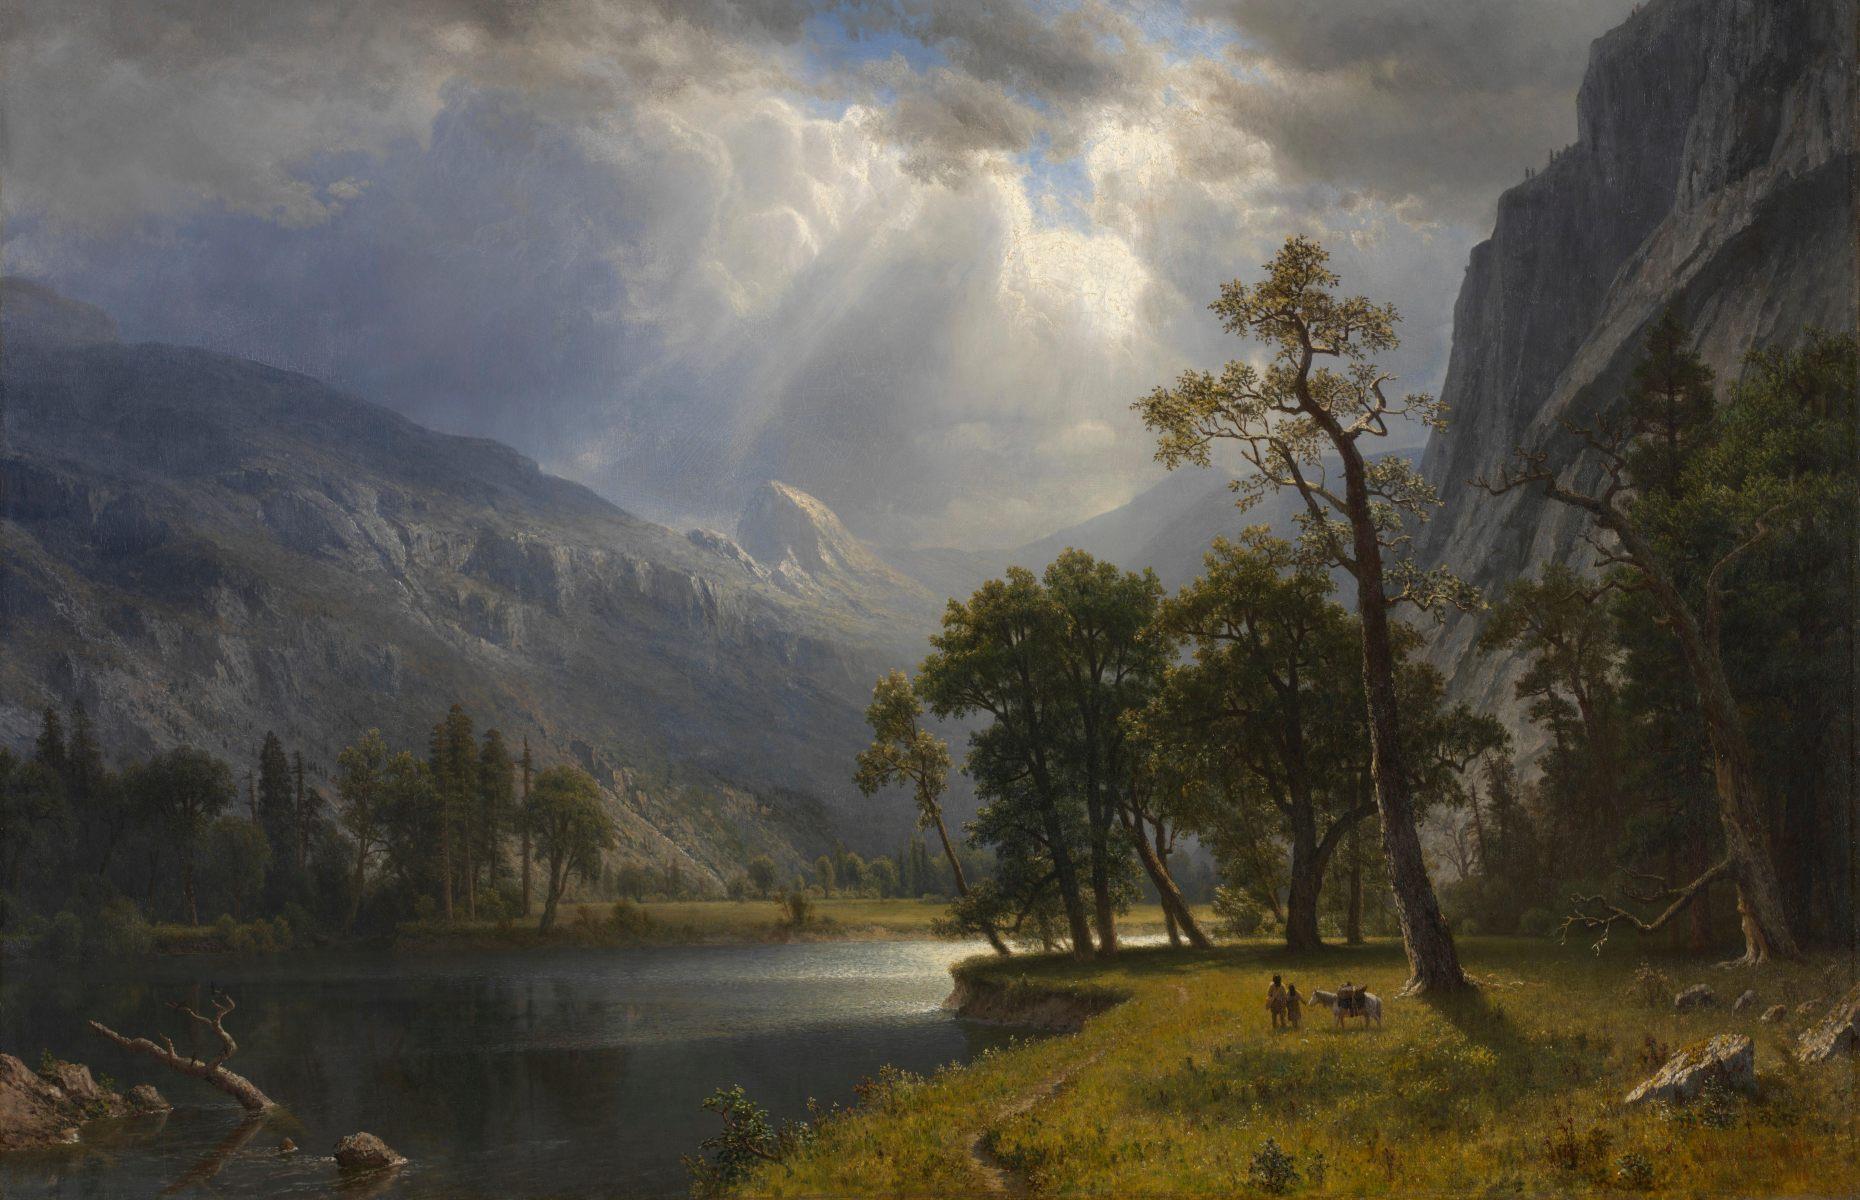 <p>Images of Yosemite didn’t just help promote its stunning sights to the wider world, they also contributed to the foundation of the Yosemite Grant in the park's early history. Works by artists and photographers like Thomas Ayres, Albert Bierstadt, Thomas Hill, Carleton Watkins and Charles Leander Weed were offered as evidence that Congress and President Lincoln needed to sign the grant into law. Pictured here is an 1866 painting of Mount Starr King by Albert Bierstadt, who visited Yosemite in 1863 to make sketches, before returning to his New York studio to transform them into ethereal color scenes.</p>